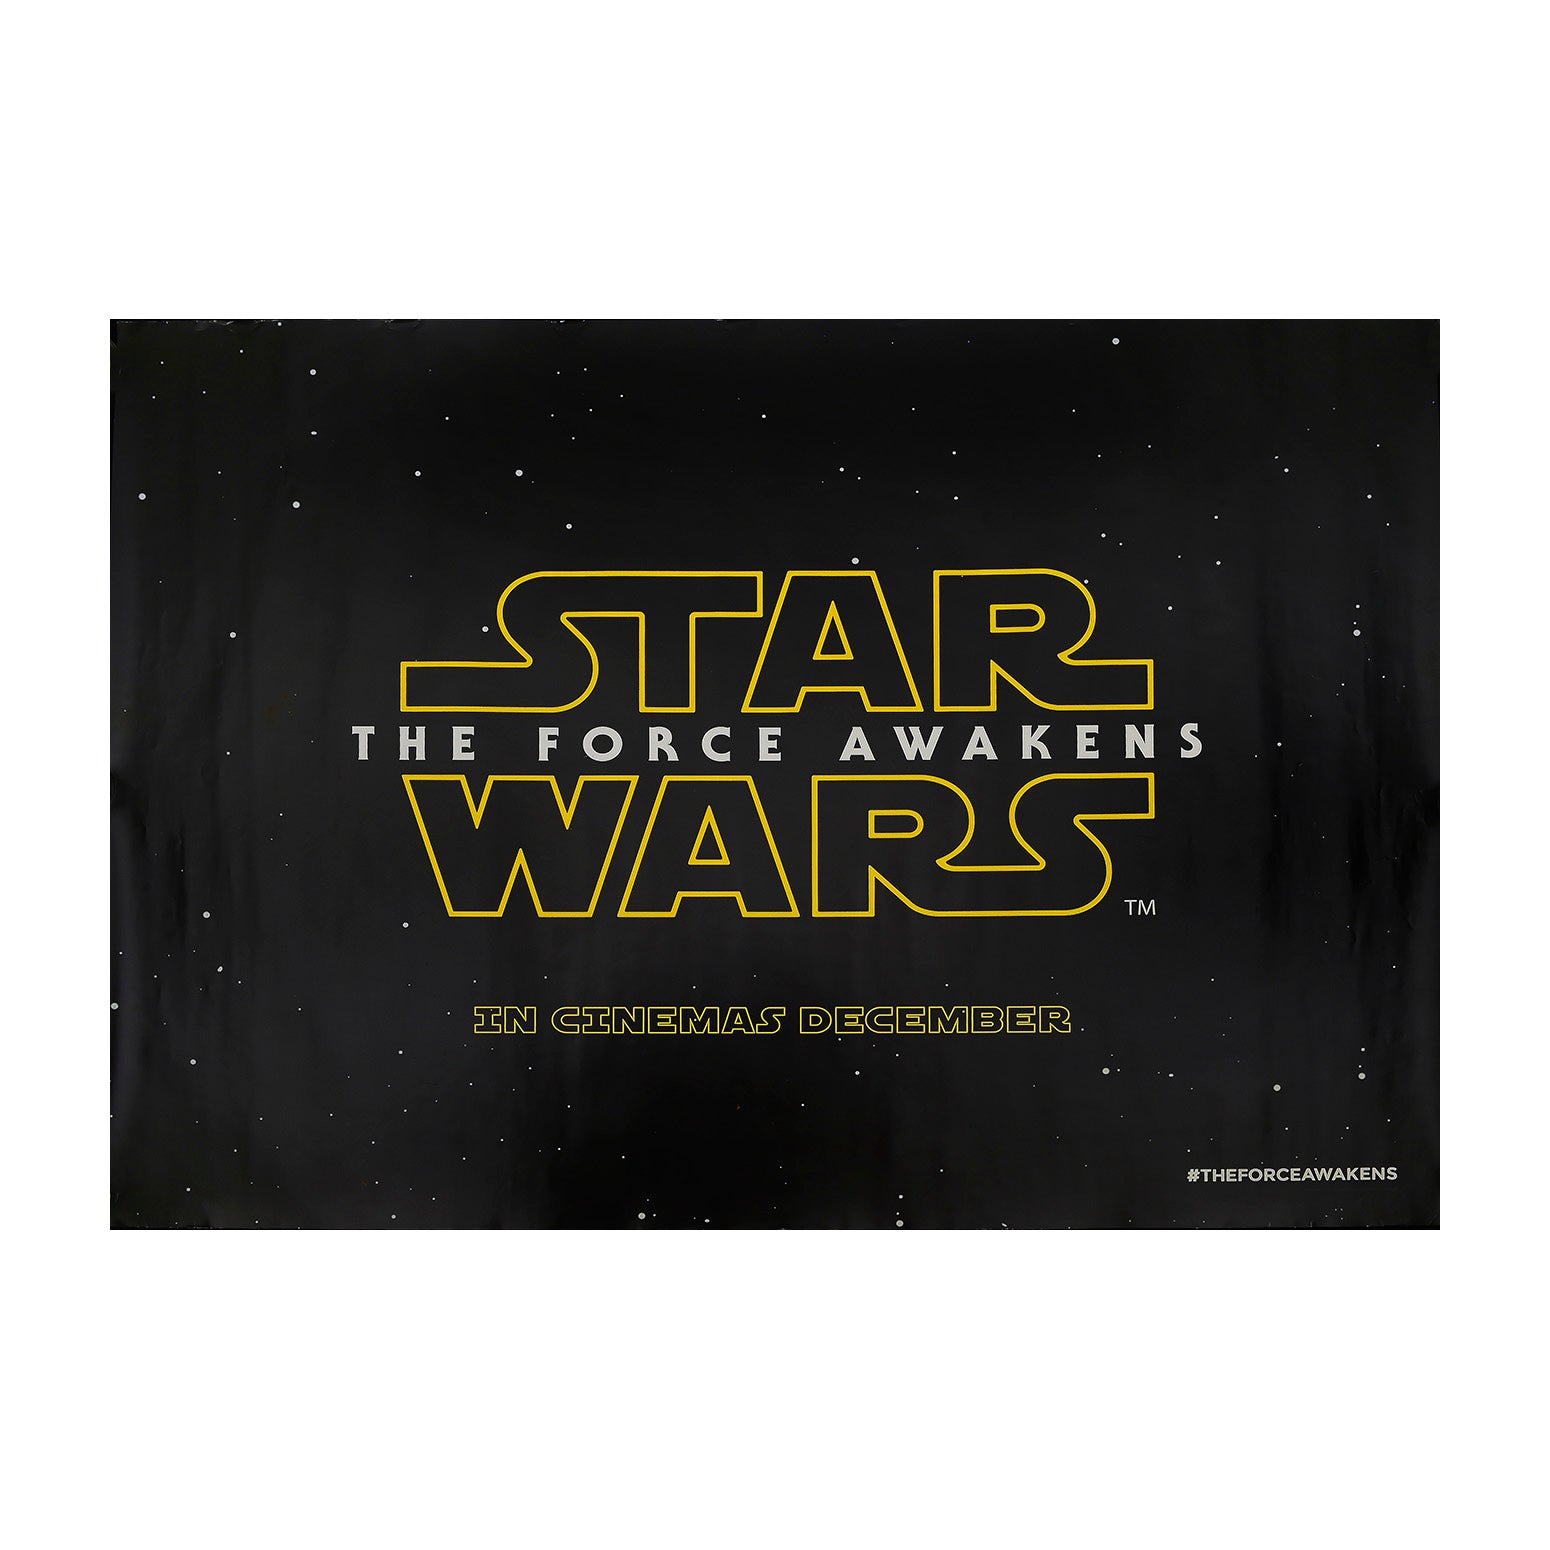 Original, pre-release, film poster, Star Wars Episode VII: The Force Awakens, 2015. This poster is the British Quad size for theatrical release and features the original, and iconic, Star Wars logo